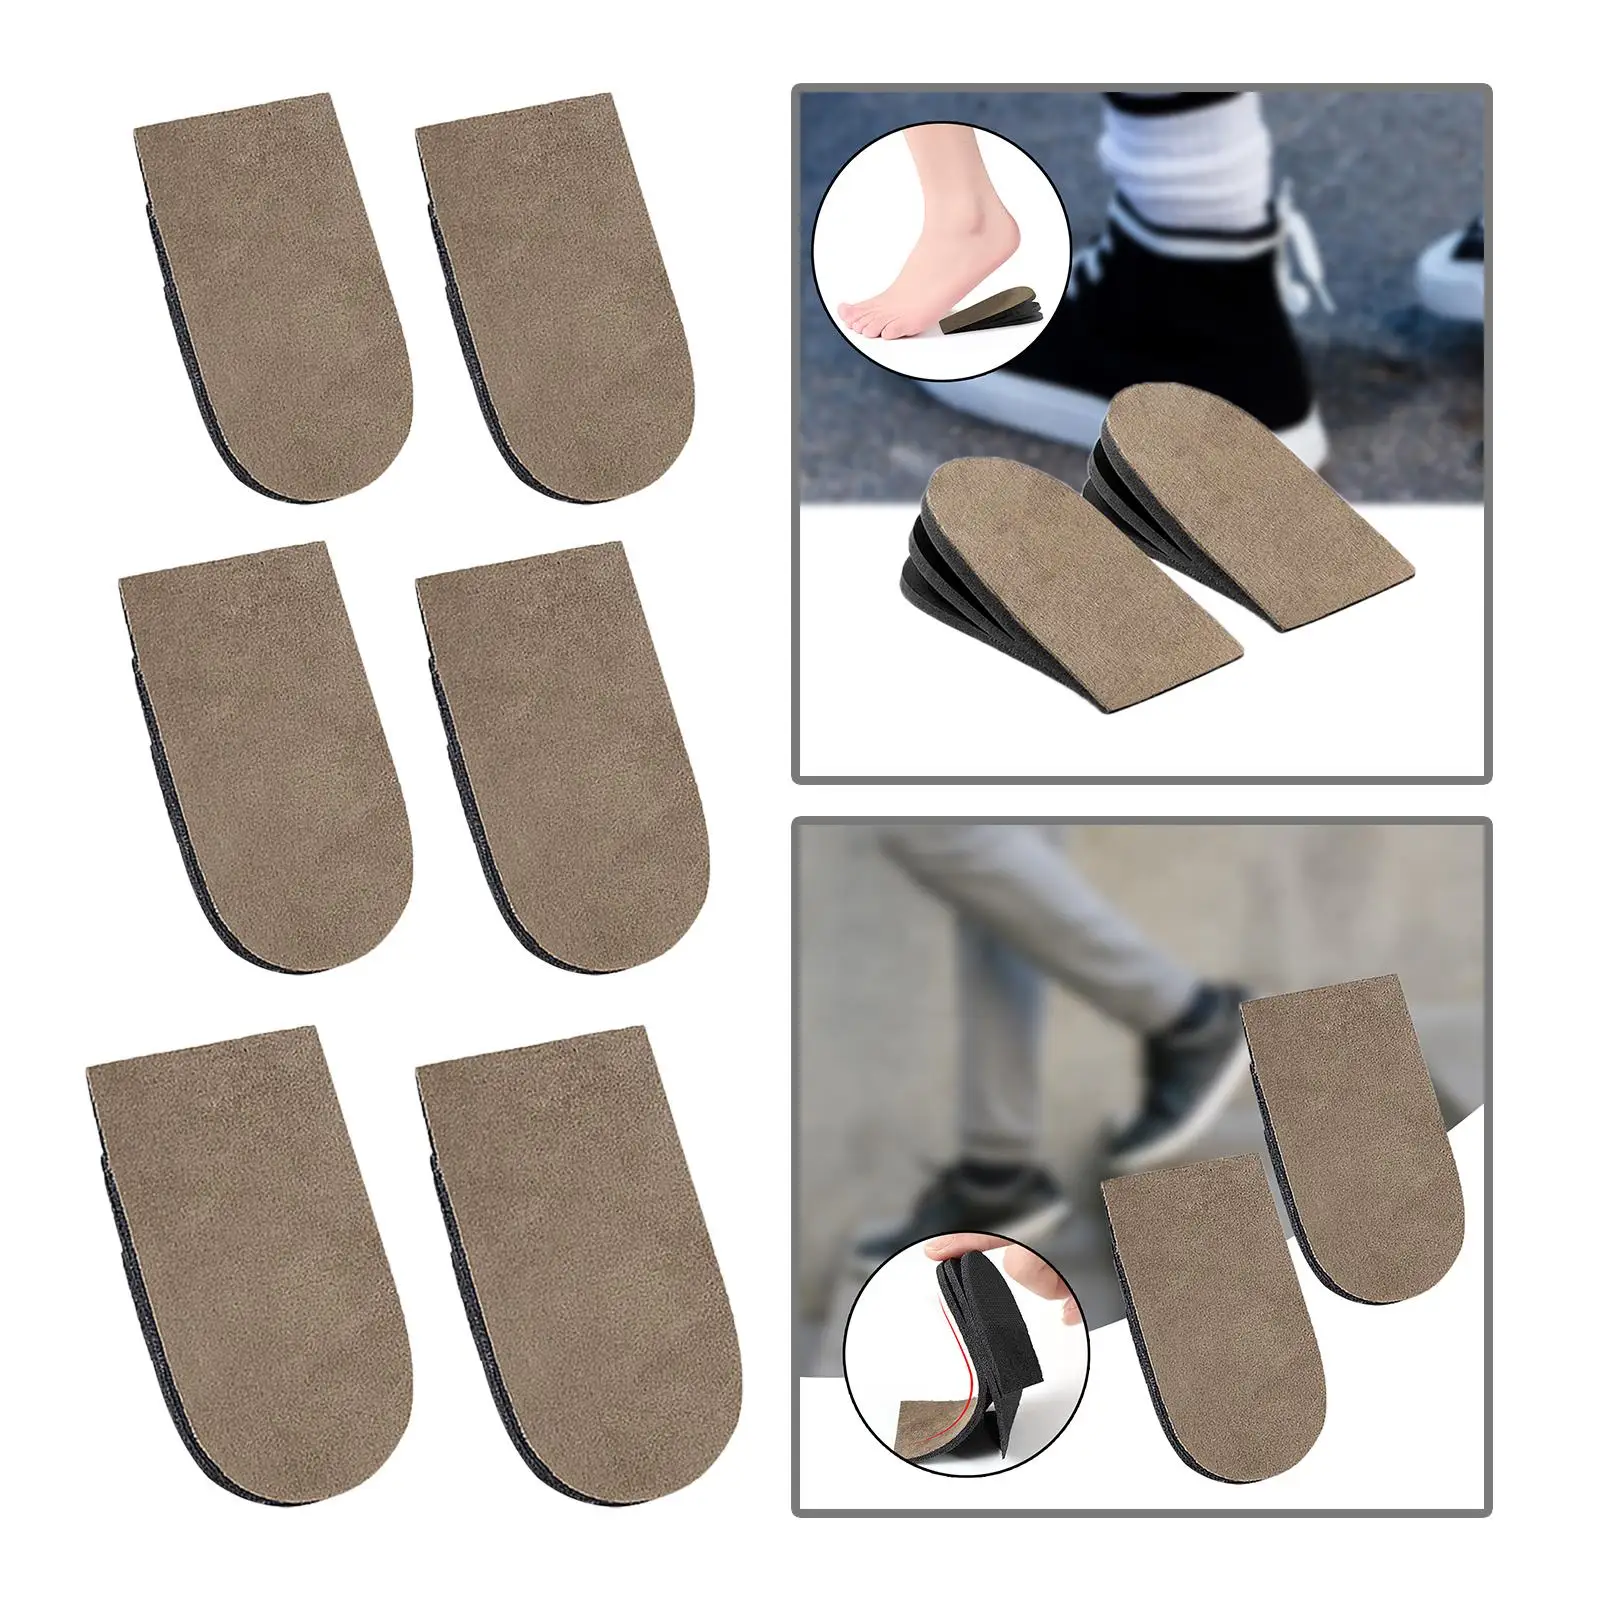 1 Pair Height Increase Insoles adjustable Shock Absorption Shoe Lifts Elevator Heel Cushion Inserts for Men Women Unisex